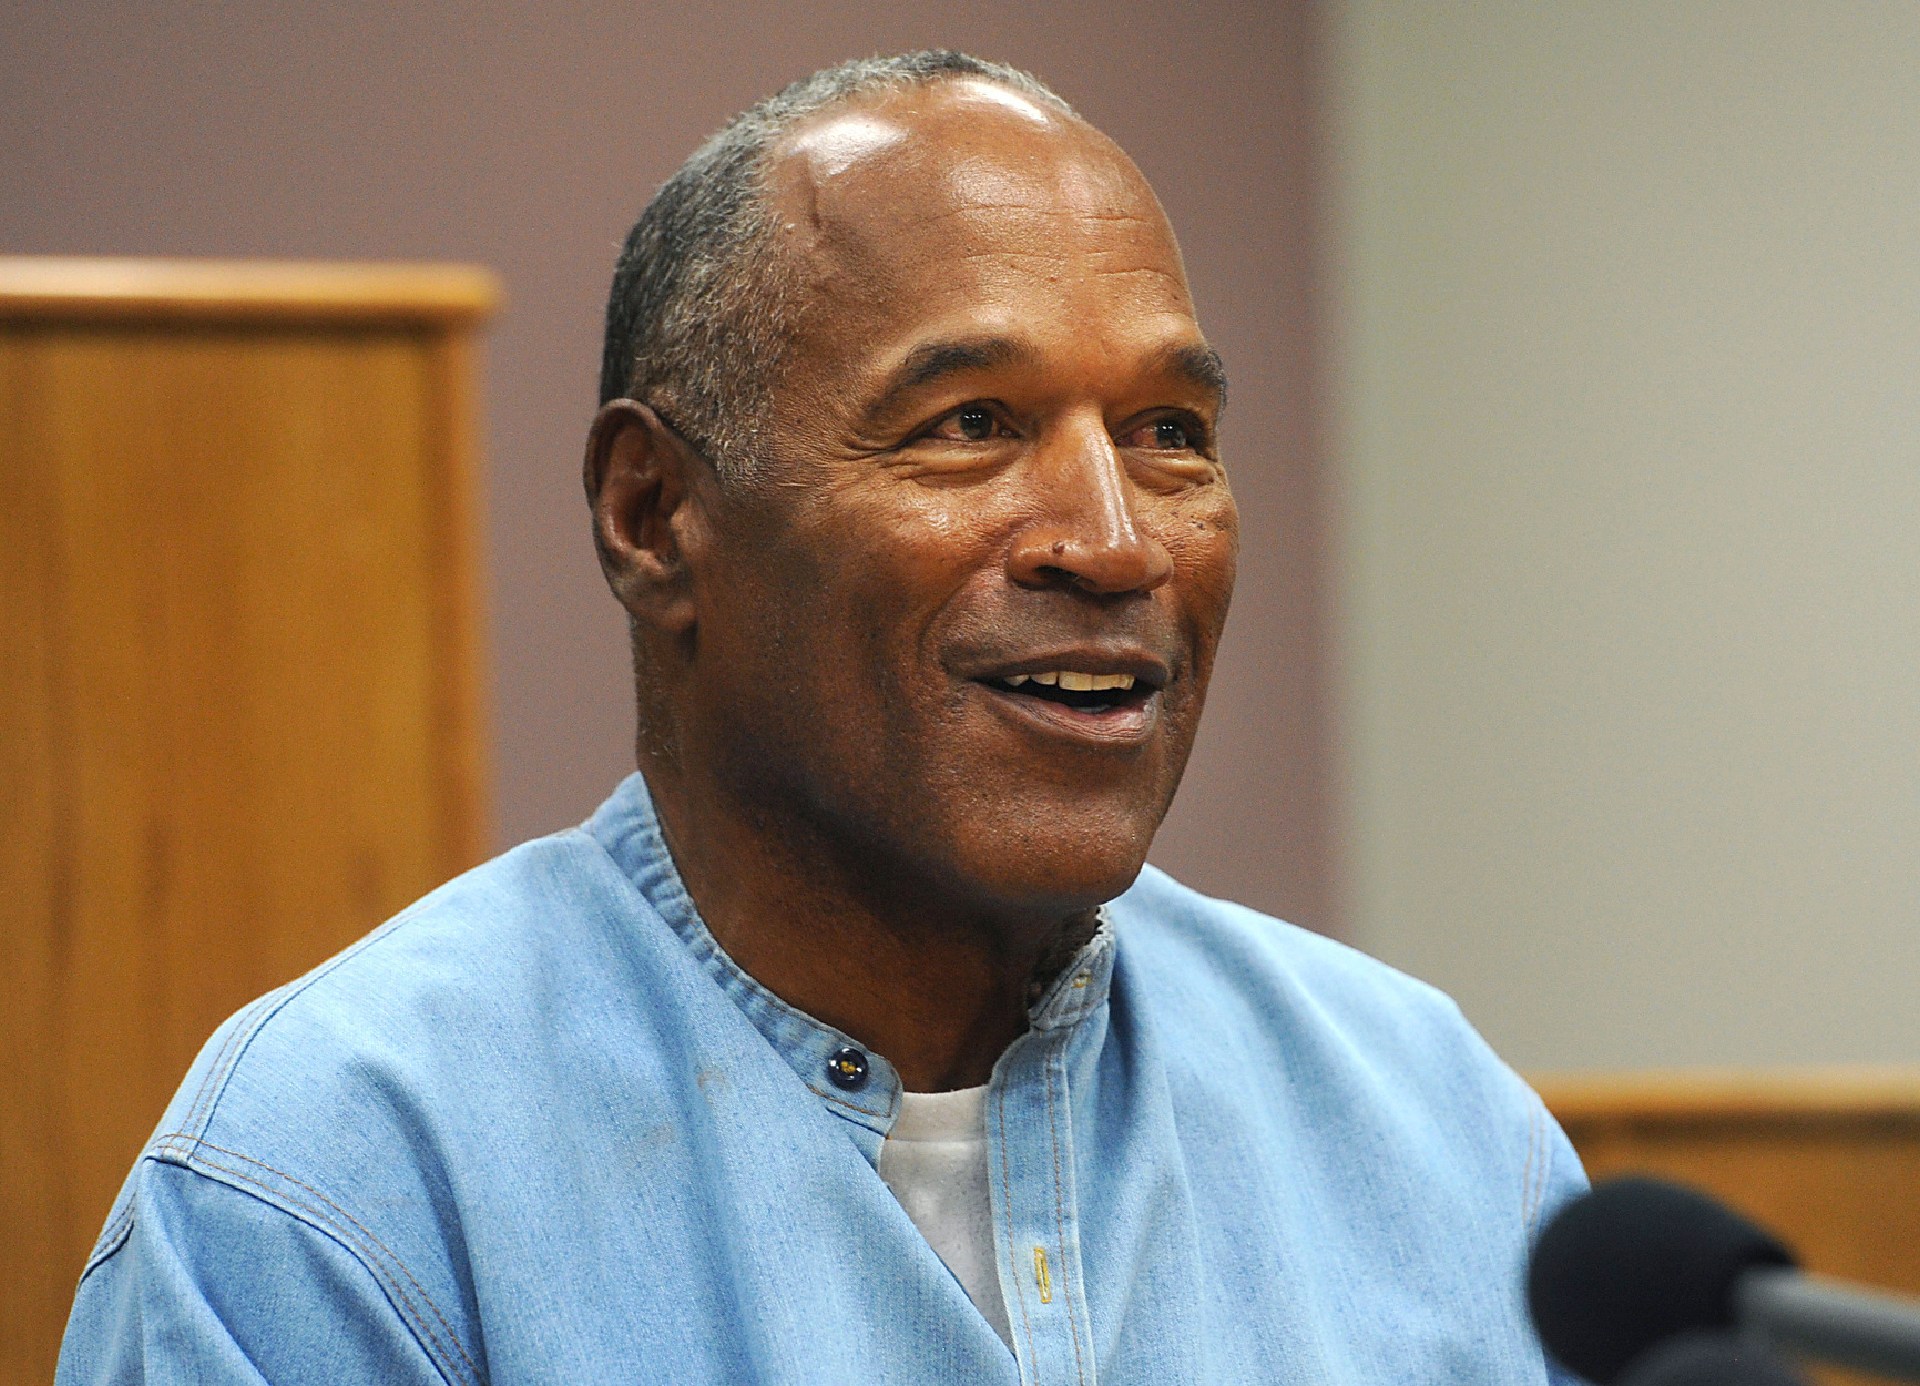 Former NFL star and actor OJ Simpson dies at 76